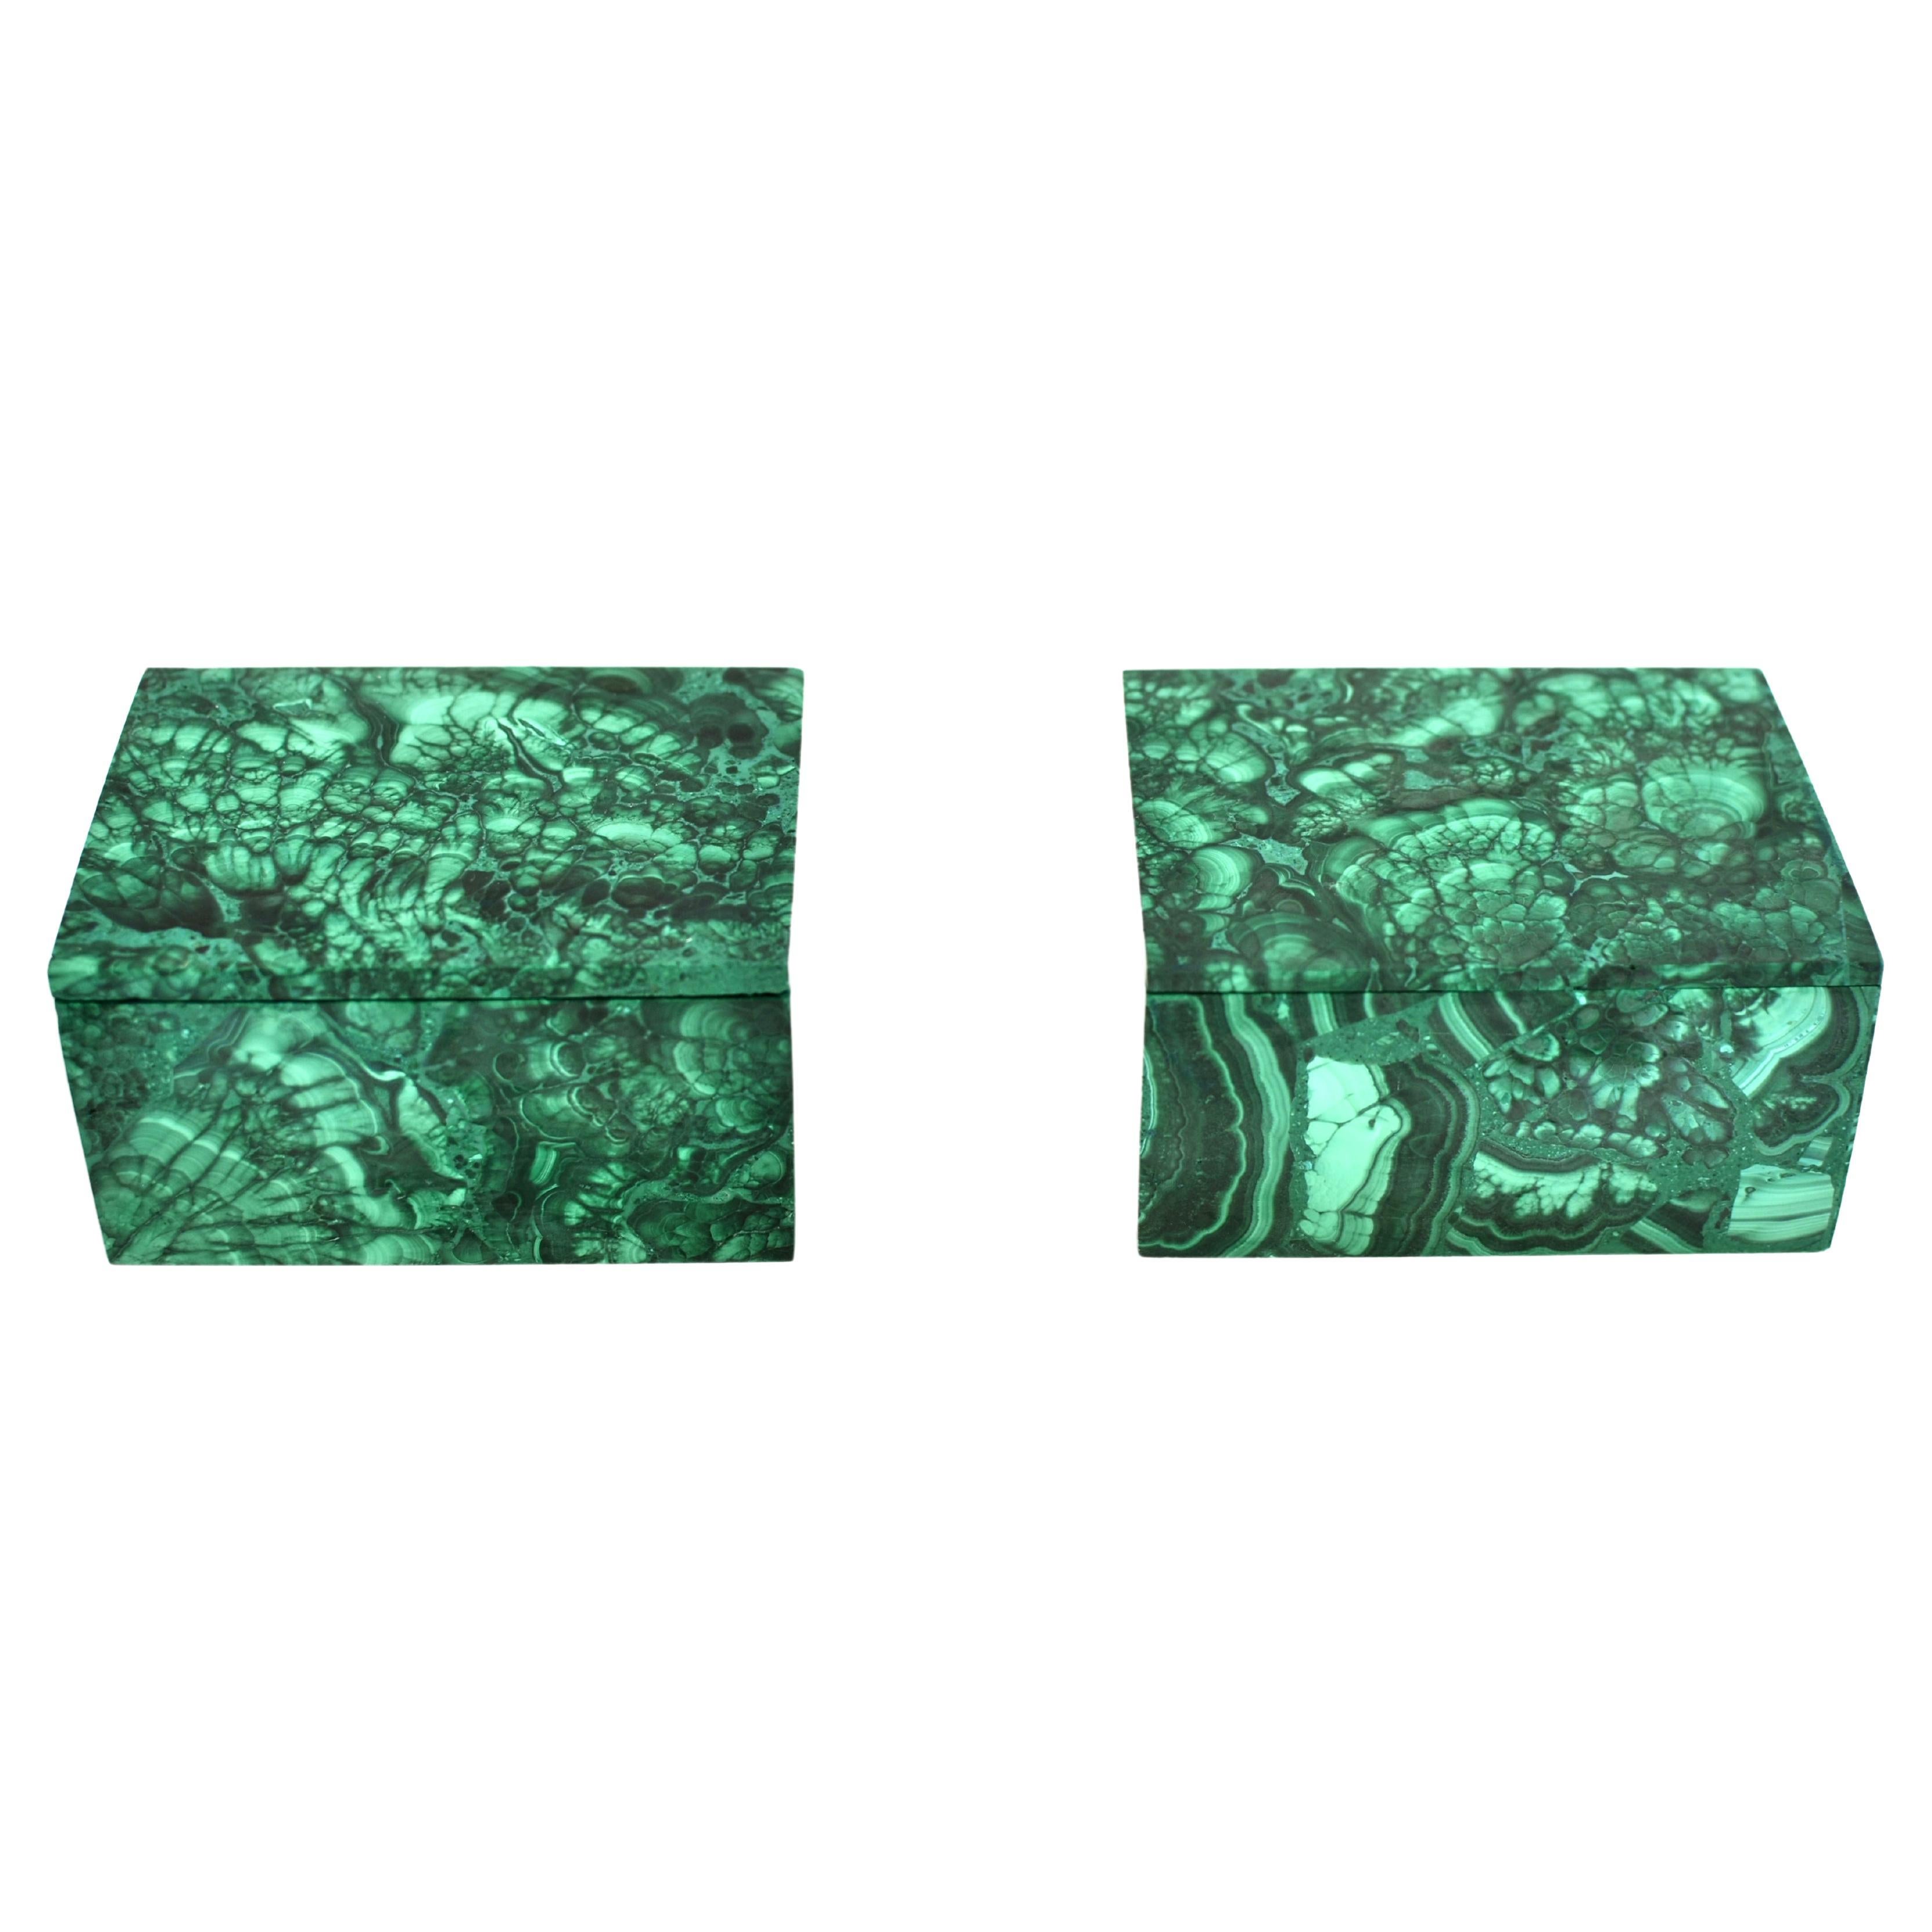 Pair of Malachite Jewelry Boxes 2.5 Lb For Sale